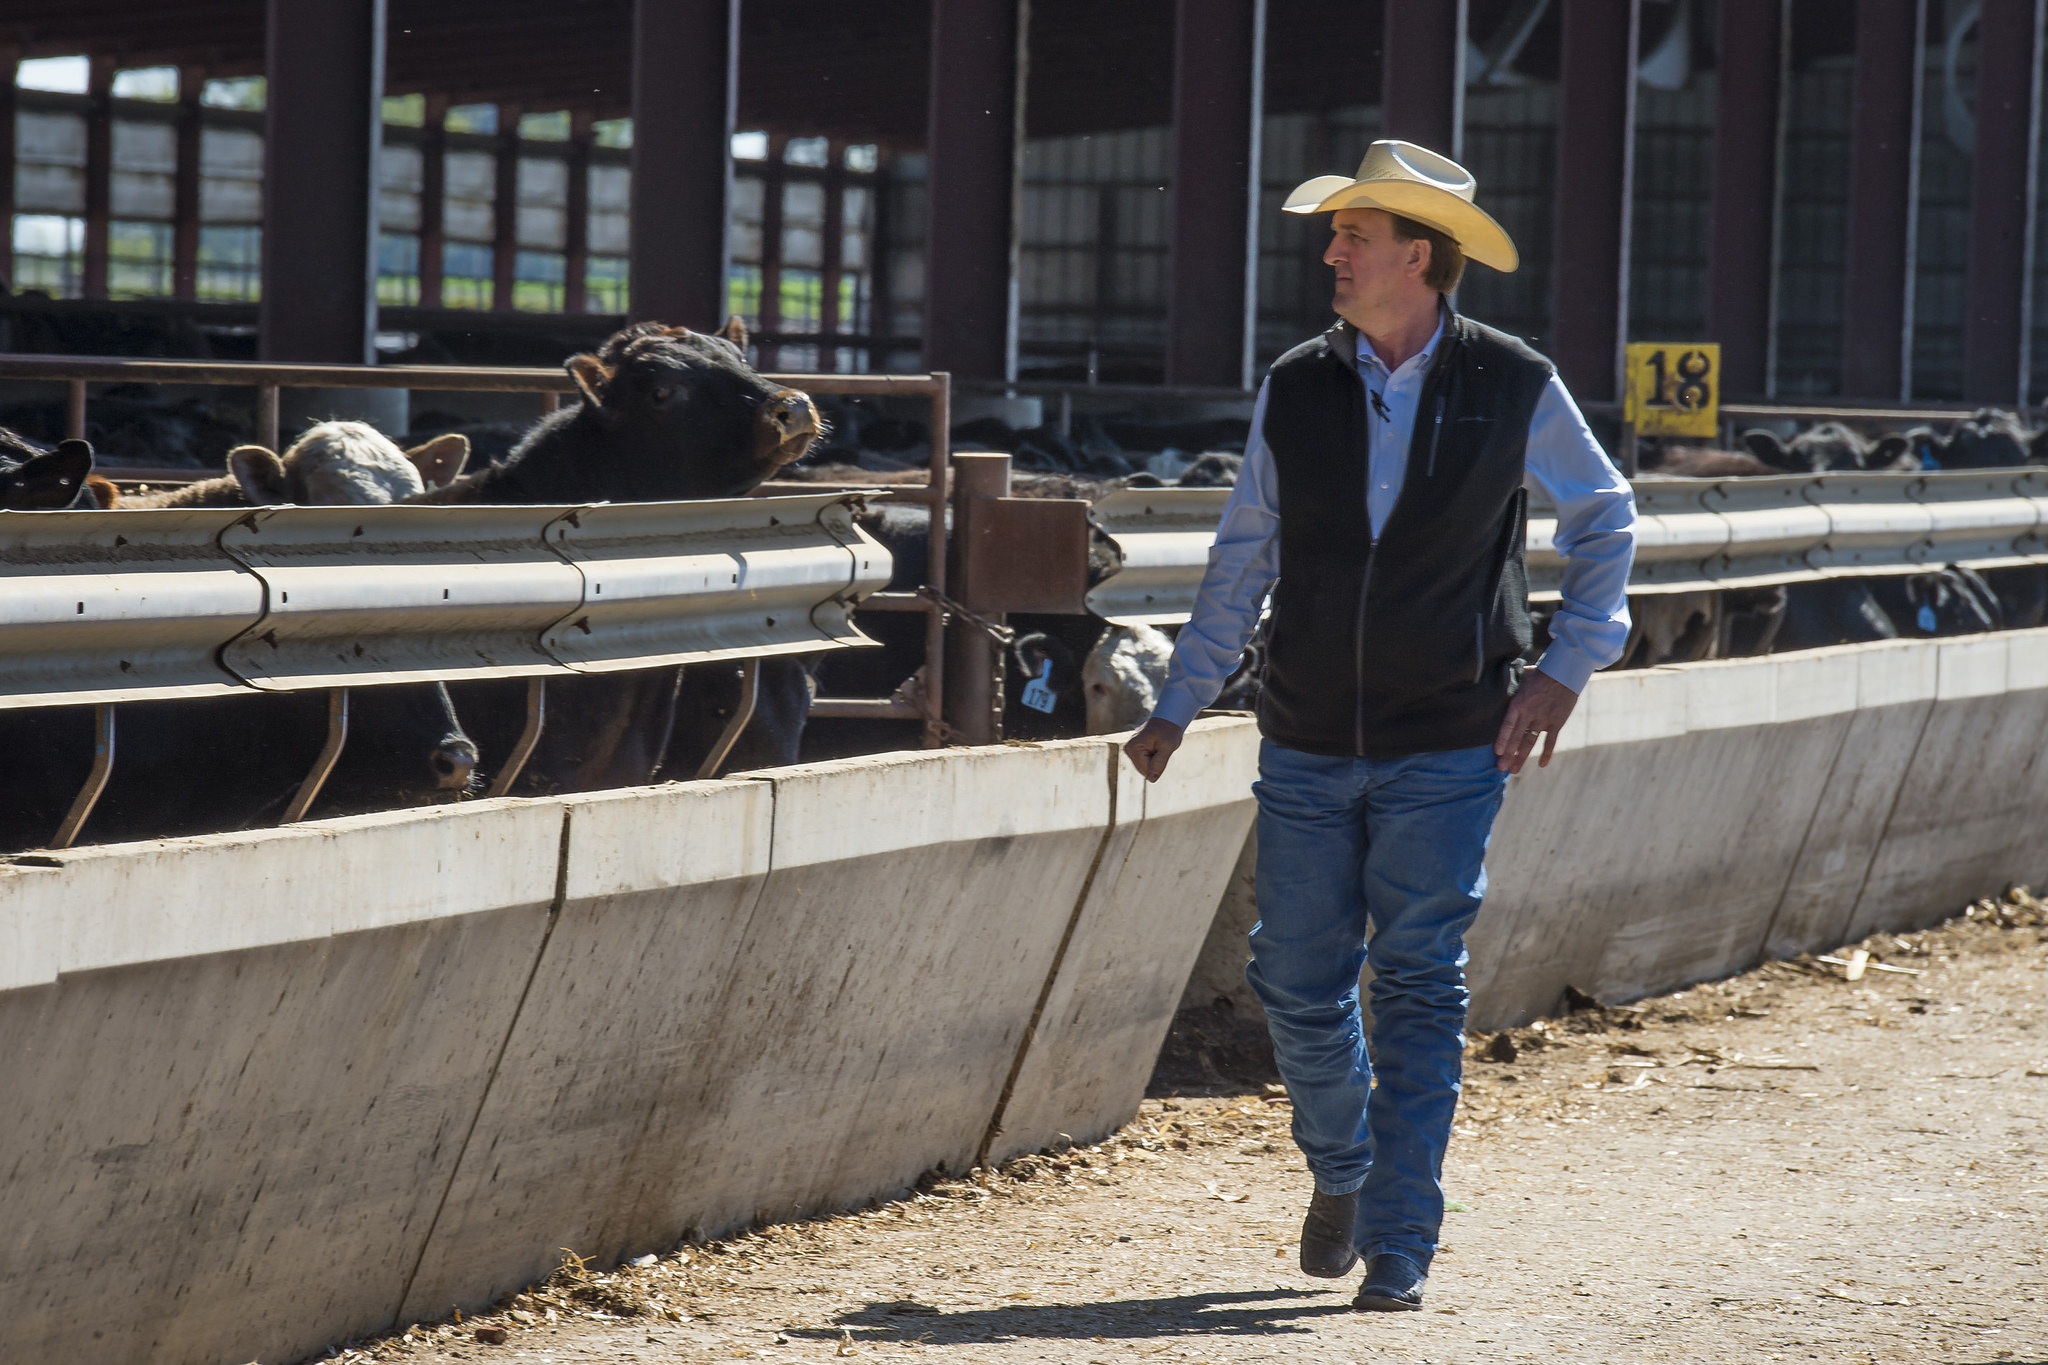 rancher observing cattle at a feedbunk